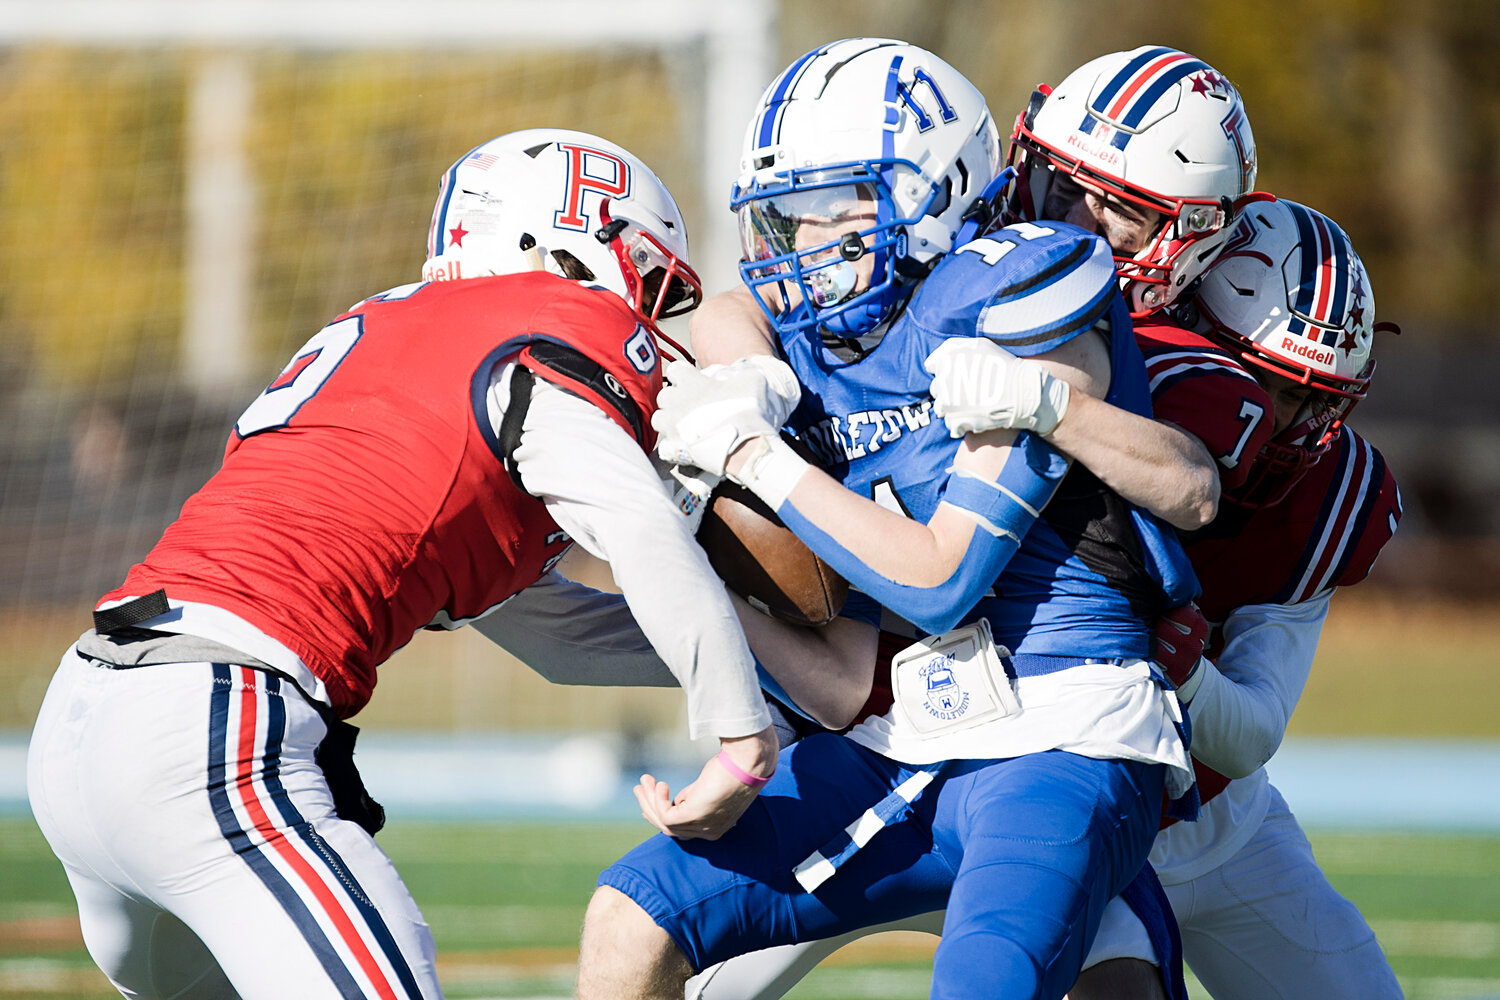 Tyler Hurd, Christopher Wilkie, and Stephen Ramponi, tackle a Middletown running back.